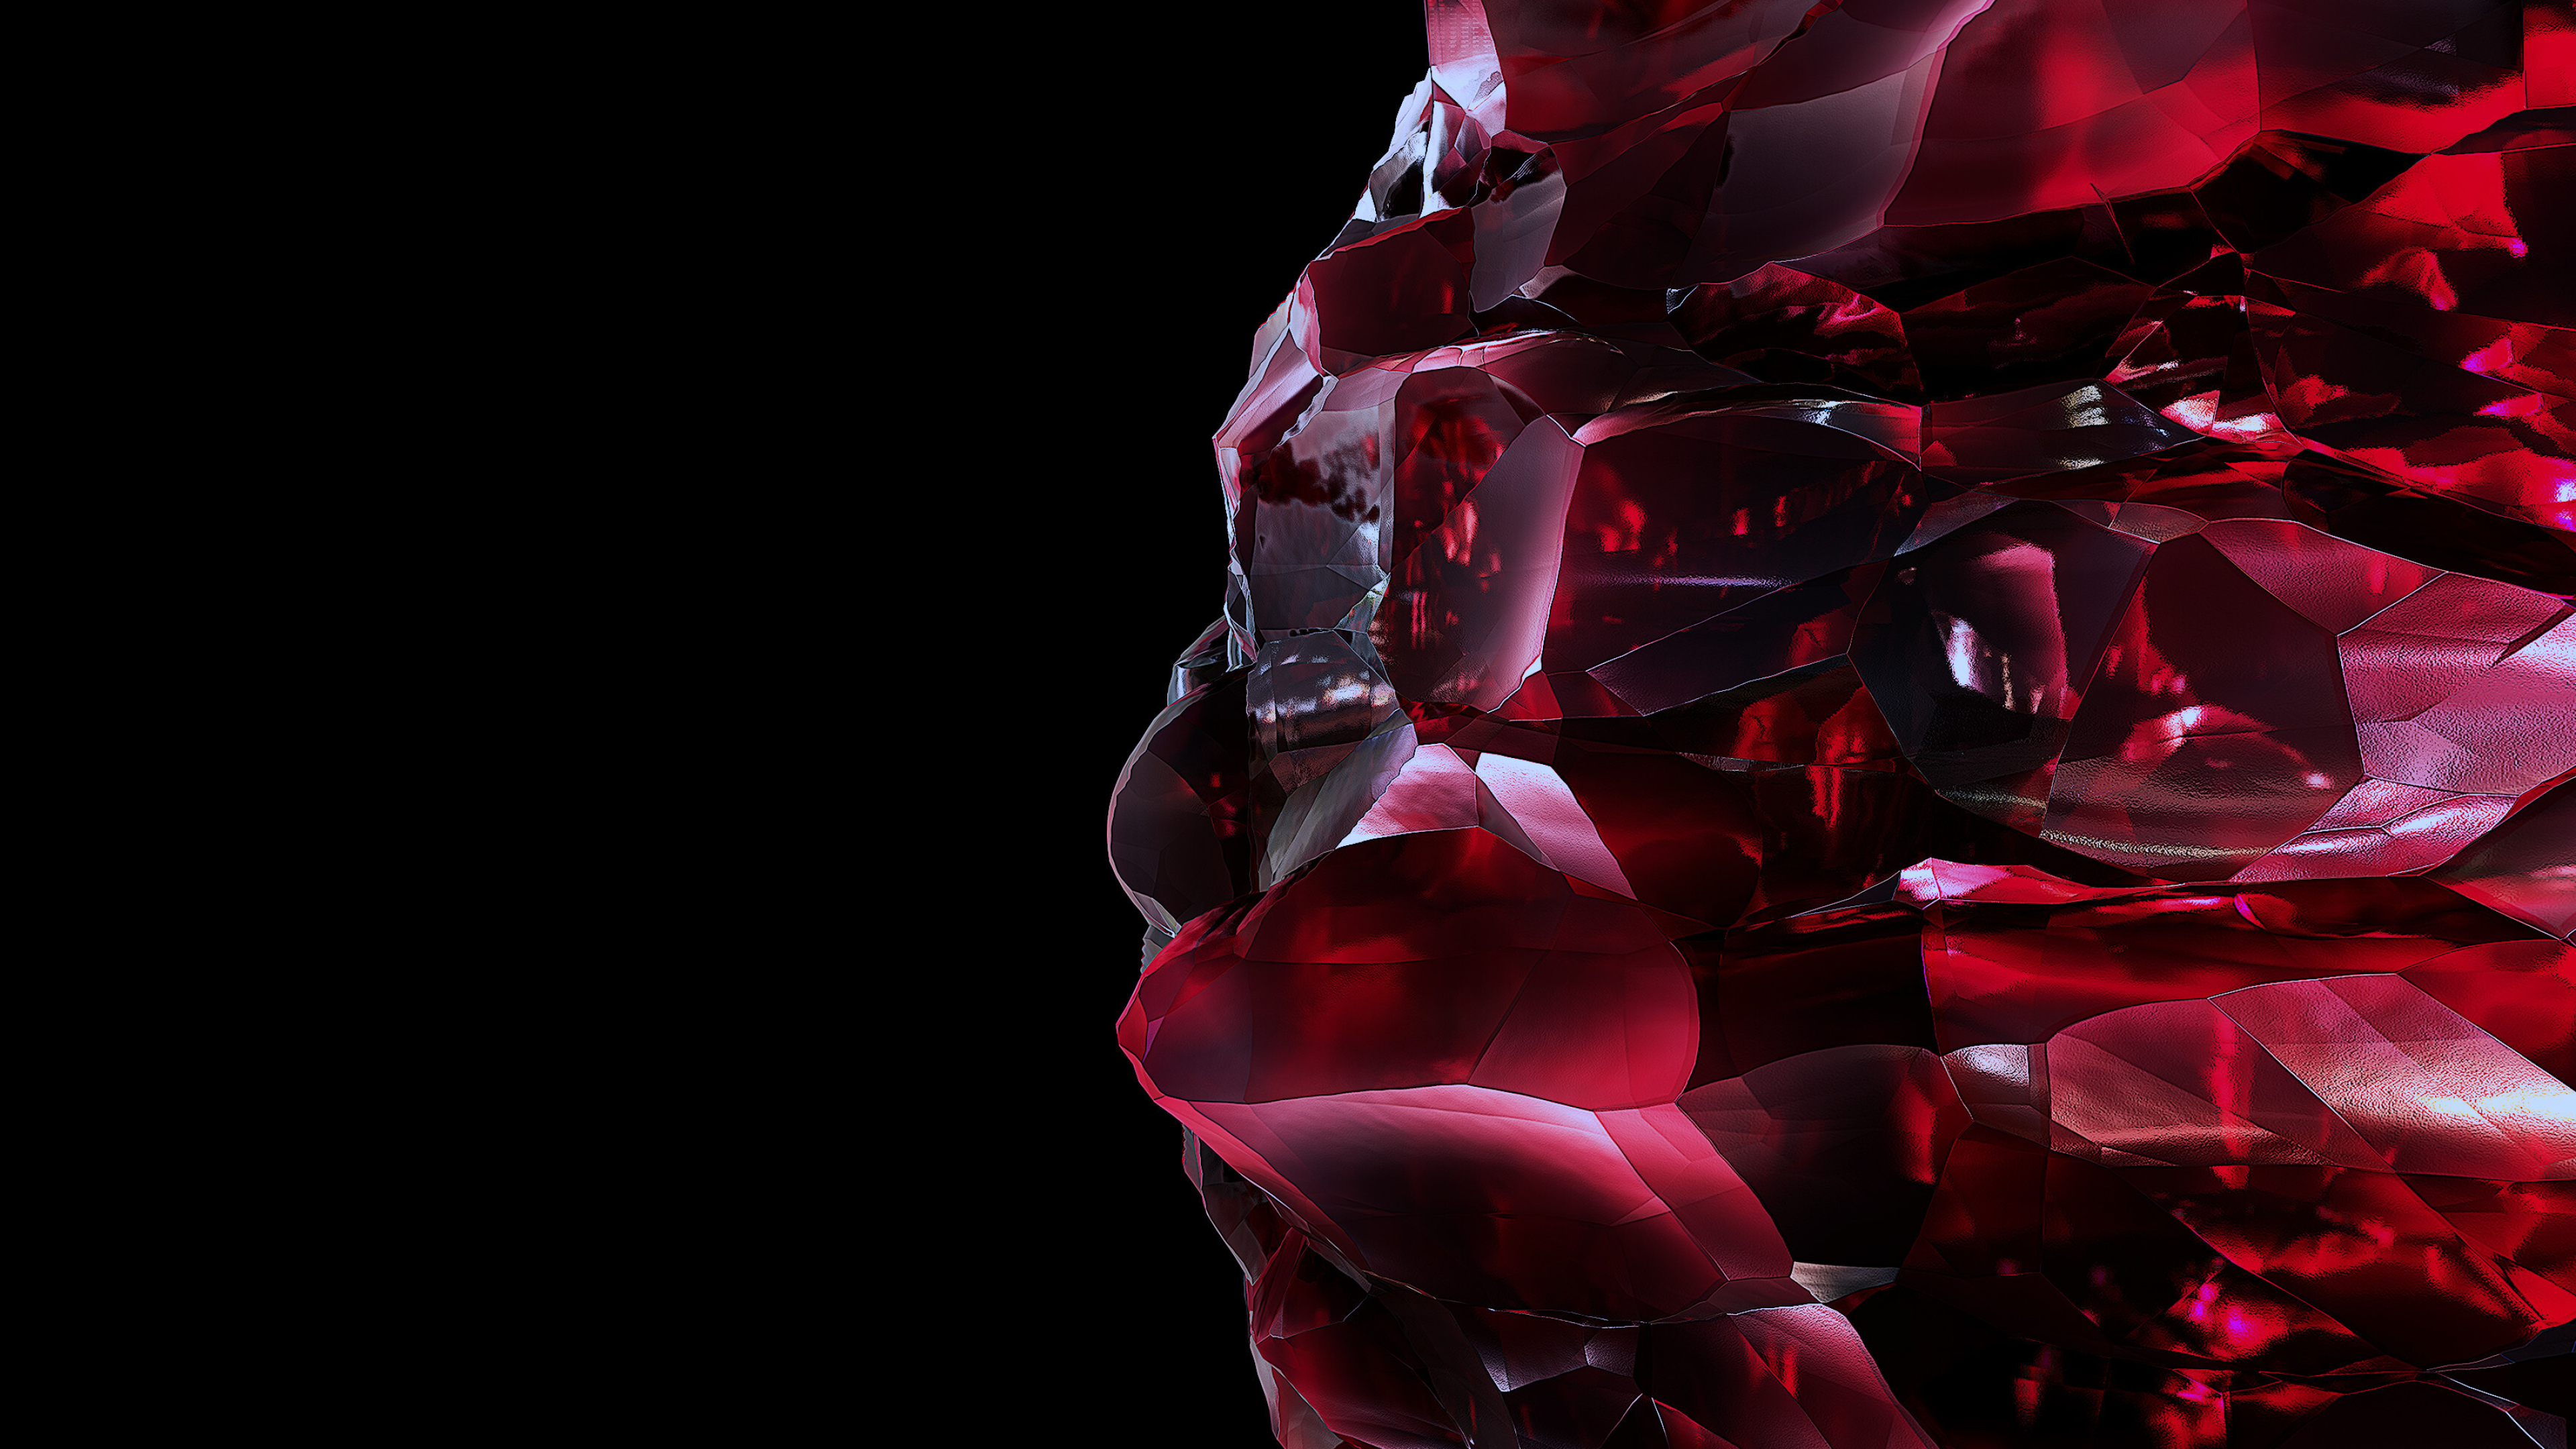 Gemstone: Stylized crystals, Various minerals highly prized for beauty durability and rarity. 3840x2160 4K Wallpaper.